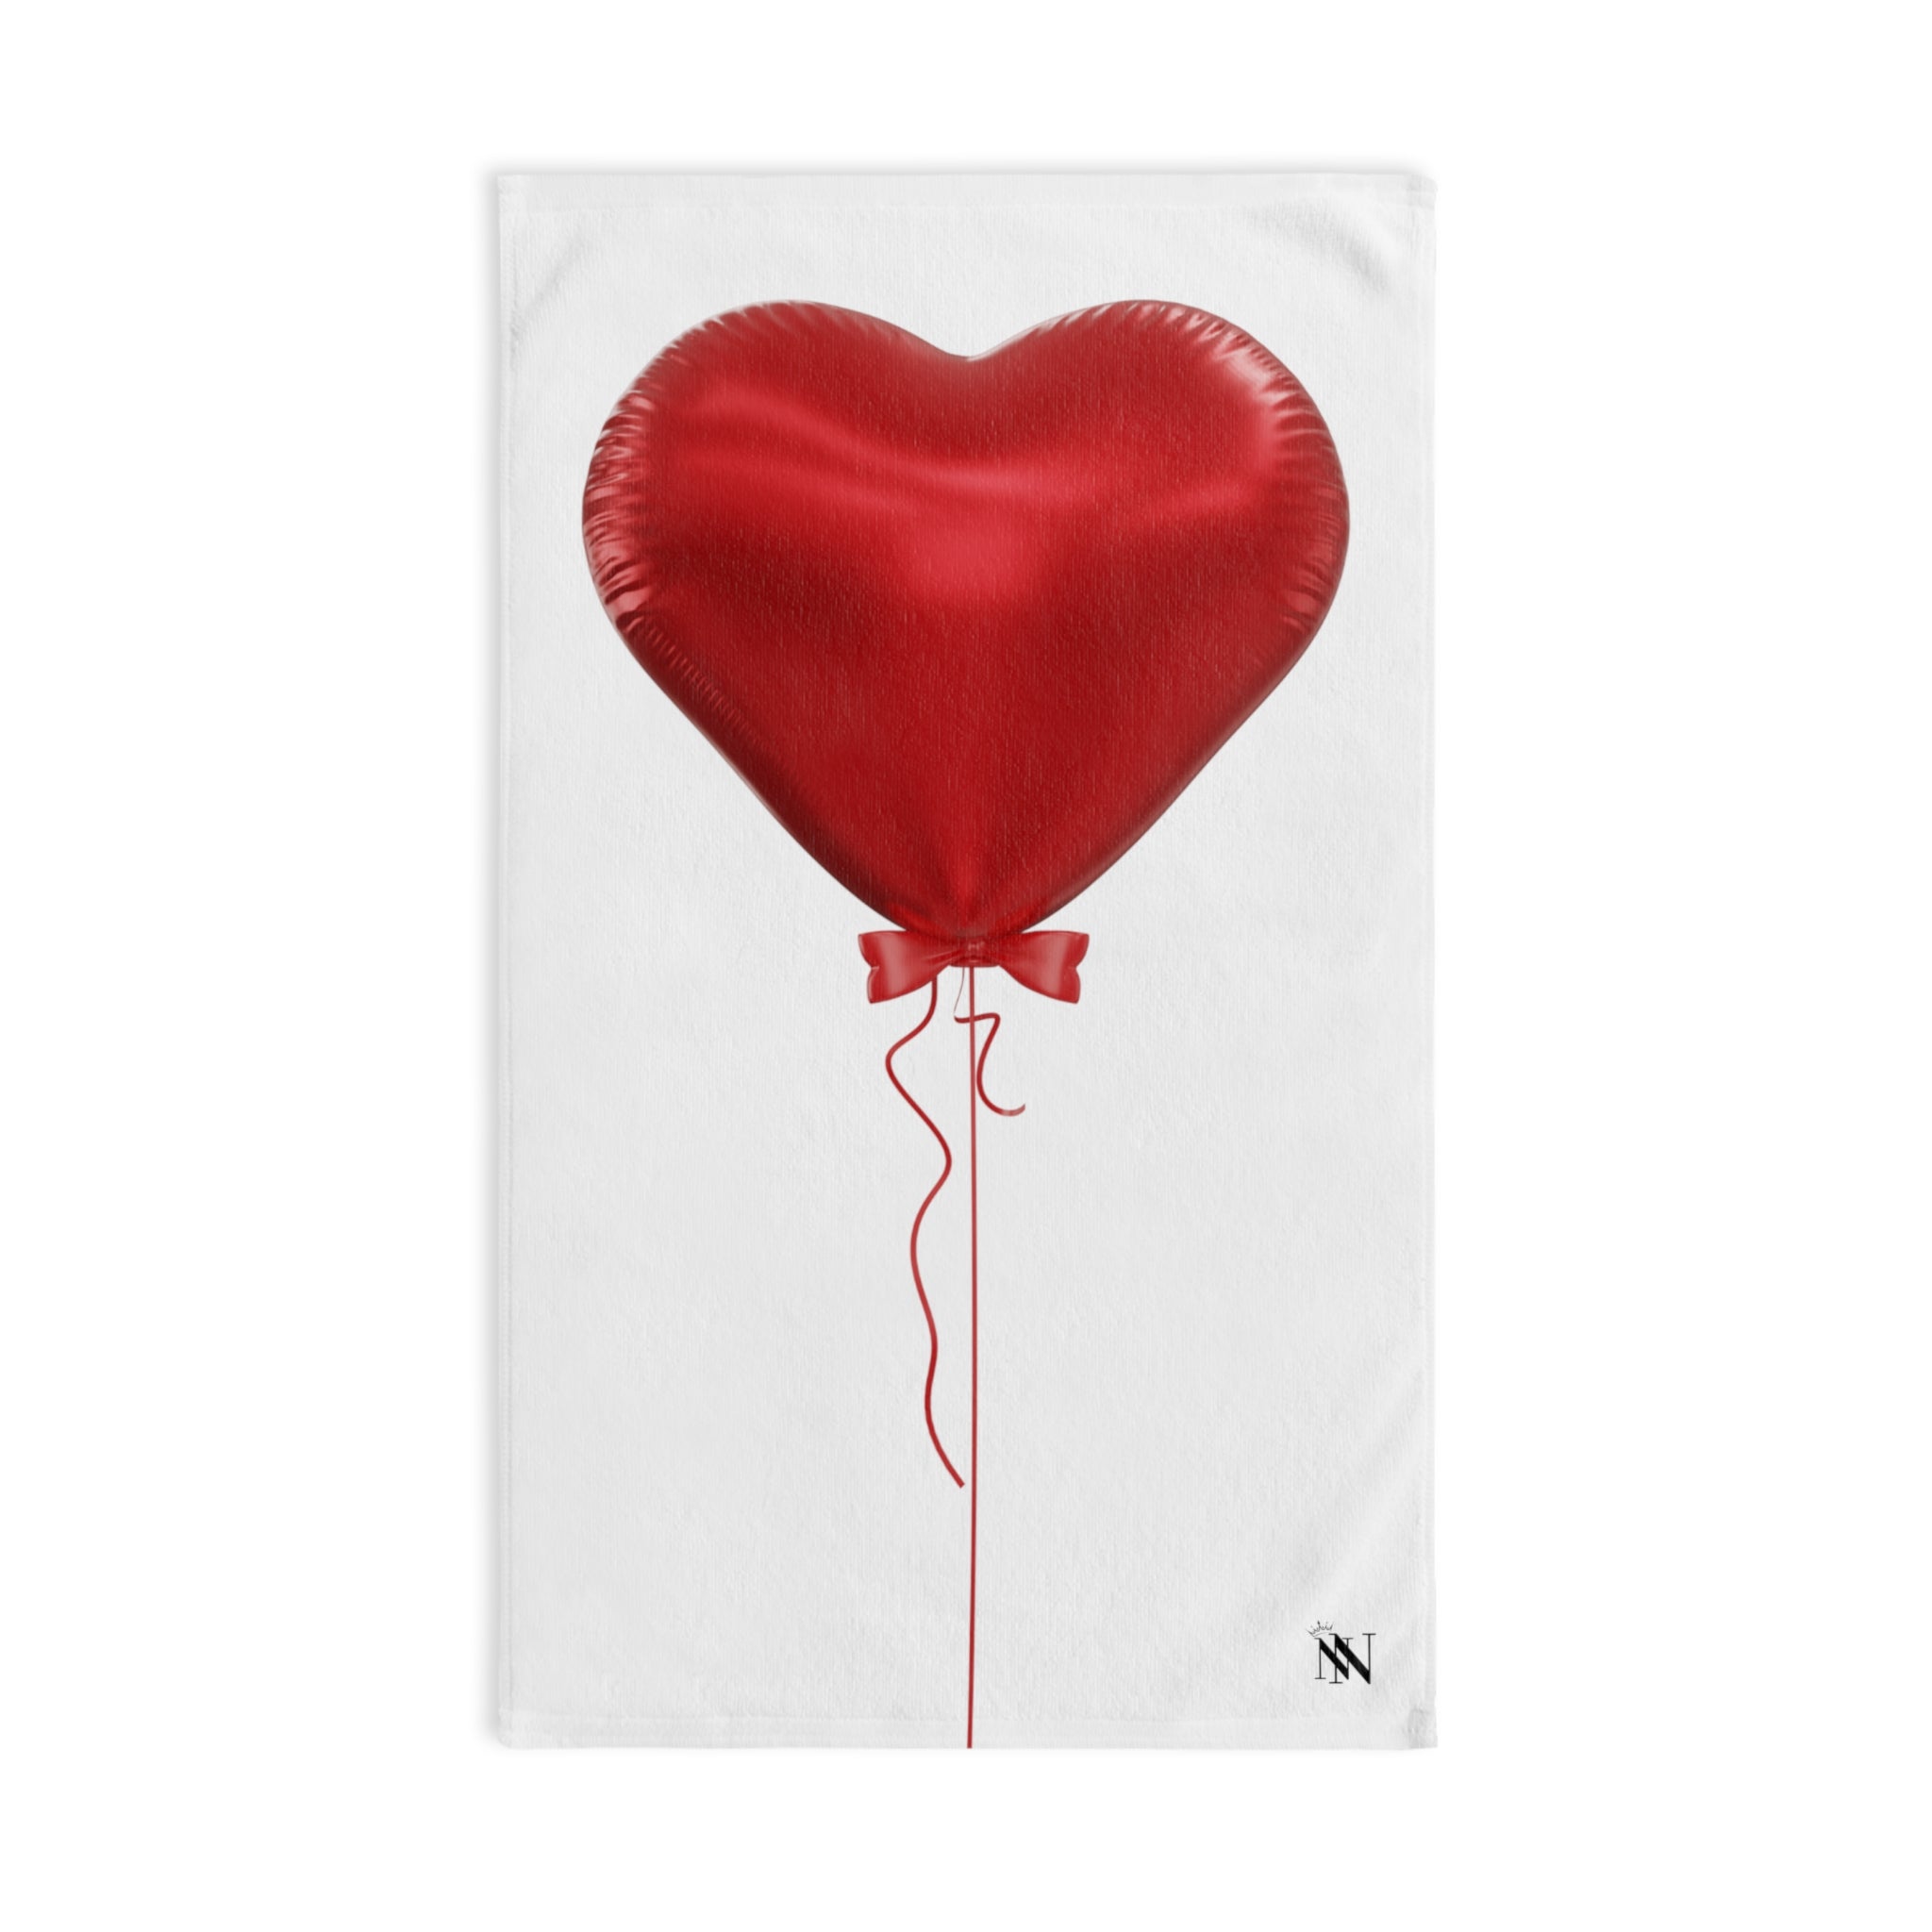 Red Balloon 3DWhite | Funny Gifts for Men - Gifts for Him - Birthday Gifts for Men, Him, Her, Husband, Boyfriend, Girlfriend, New Couple Gifts, Fathers & Valentines Day Gifts, Christmas Gifts NECTAR NAPKINS